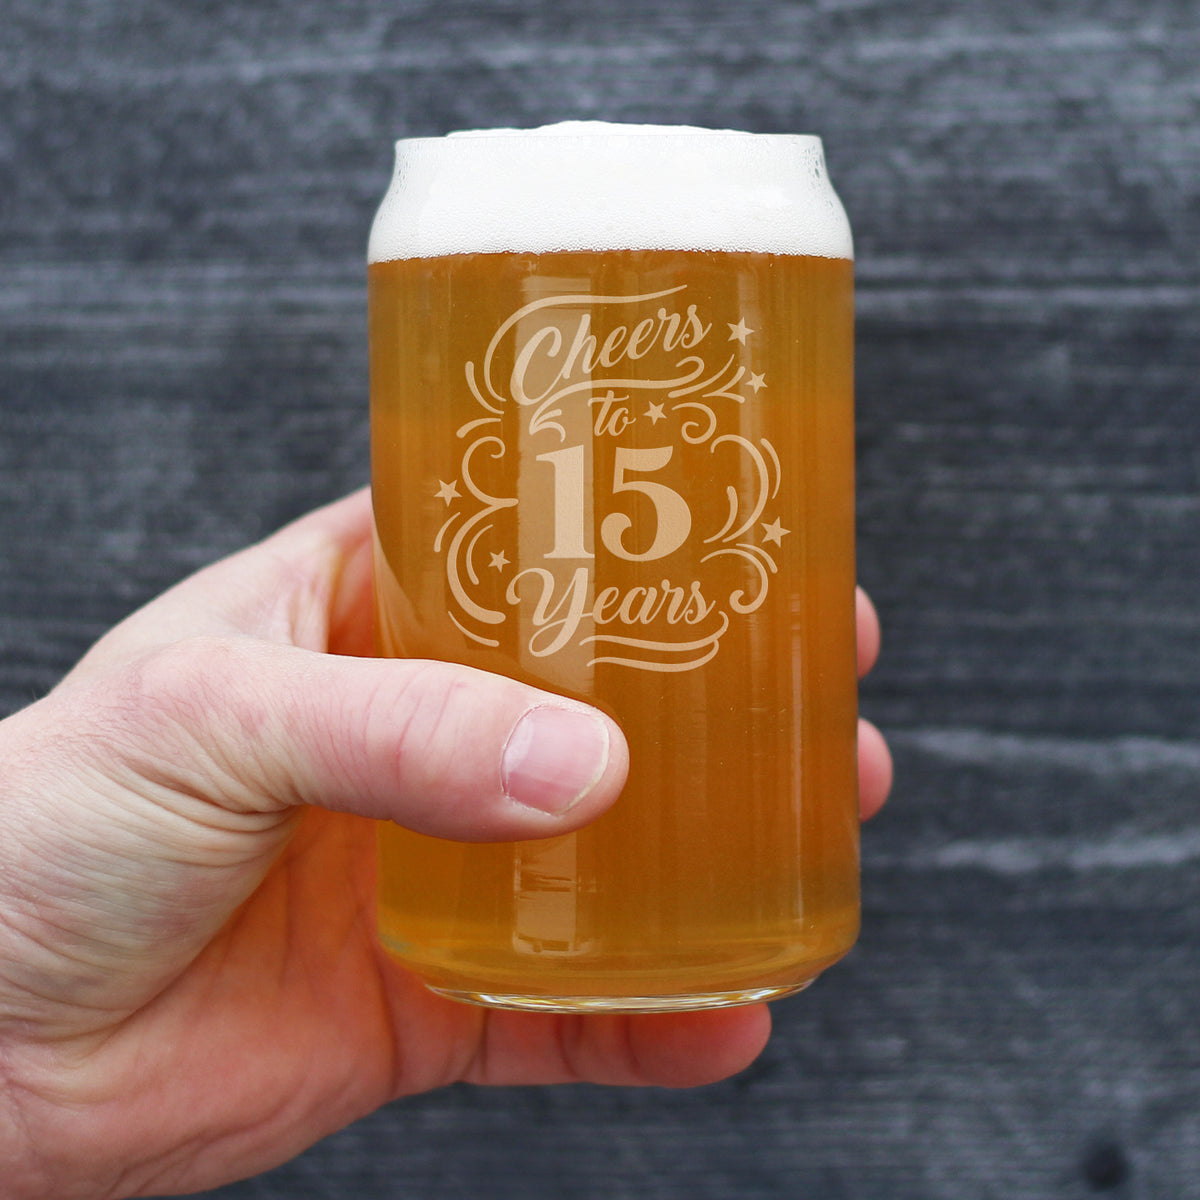 Cheers to 15 Years - Beer Can Pint Glass Gifts for Women &amp; Men - 15th Anniversary Party Decor - 16 Oz Glasses